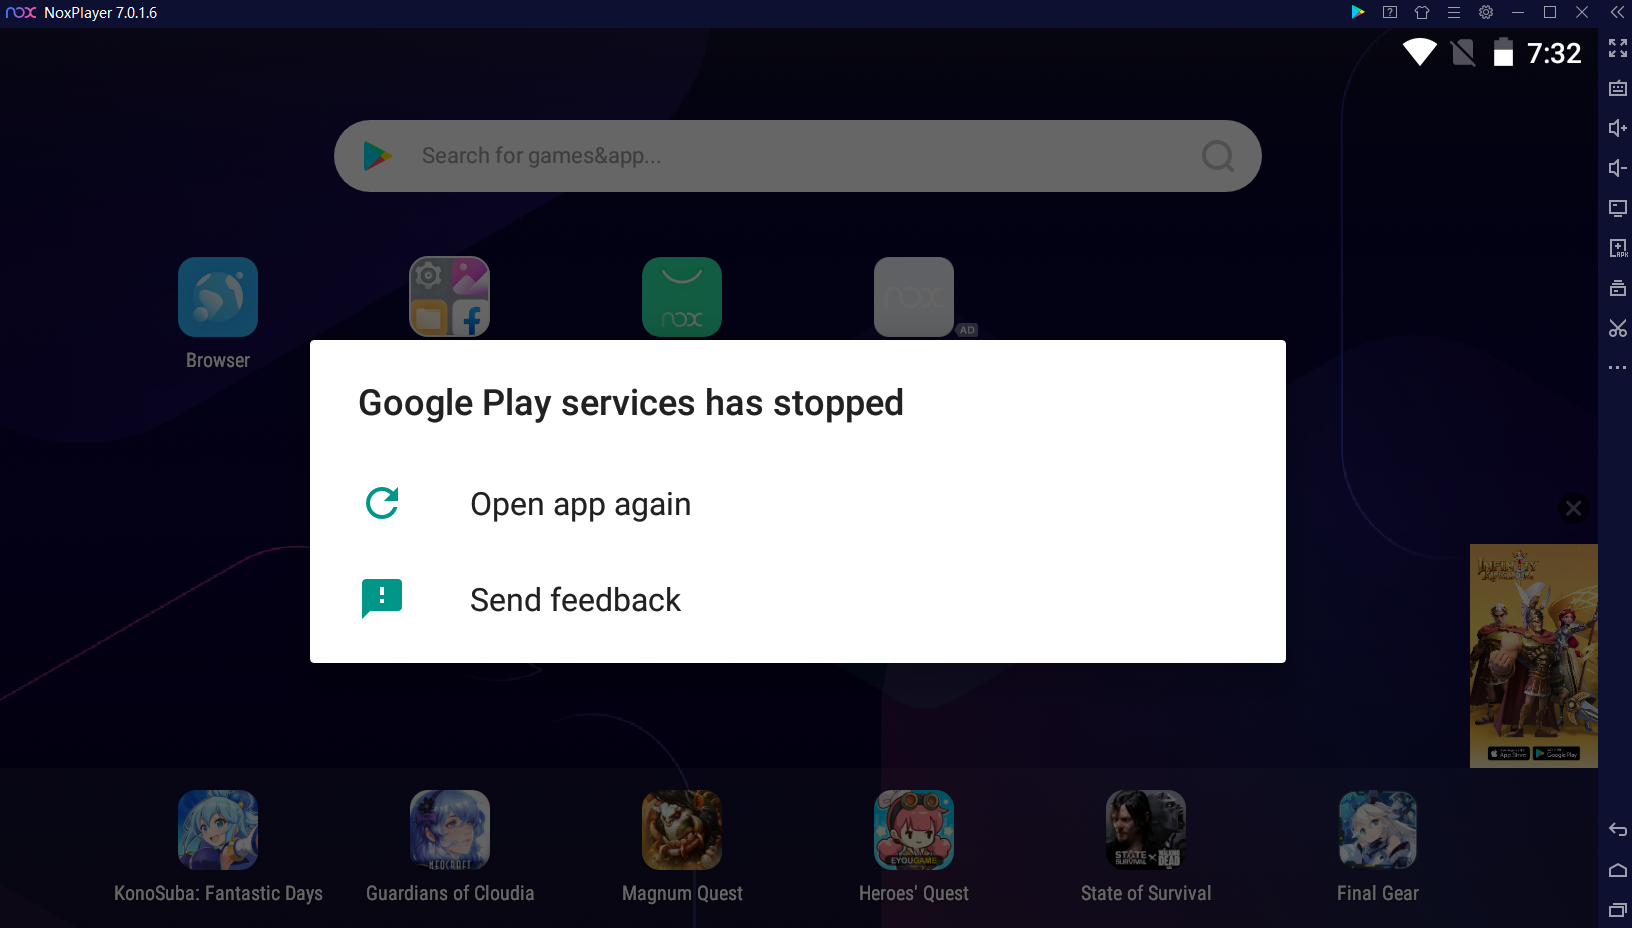 how to fix google play stopped on noxplayer 2018